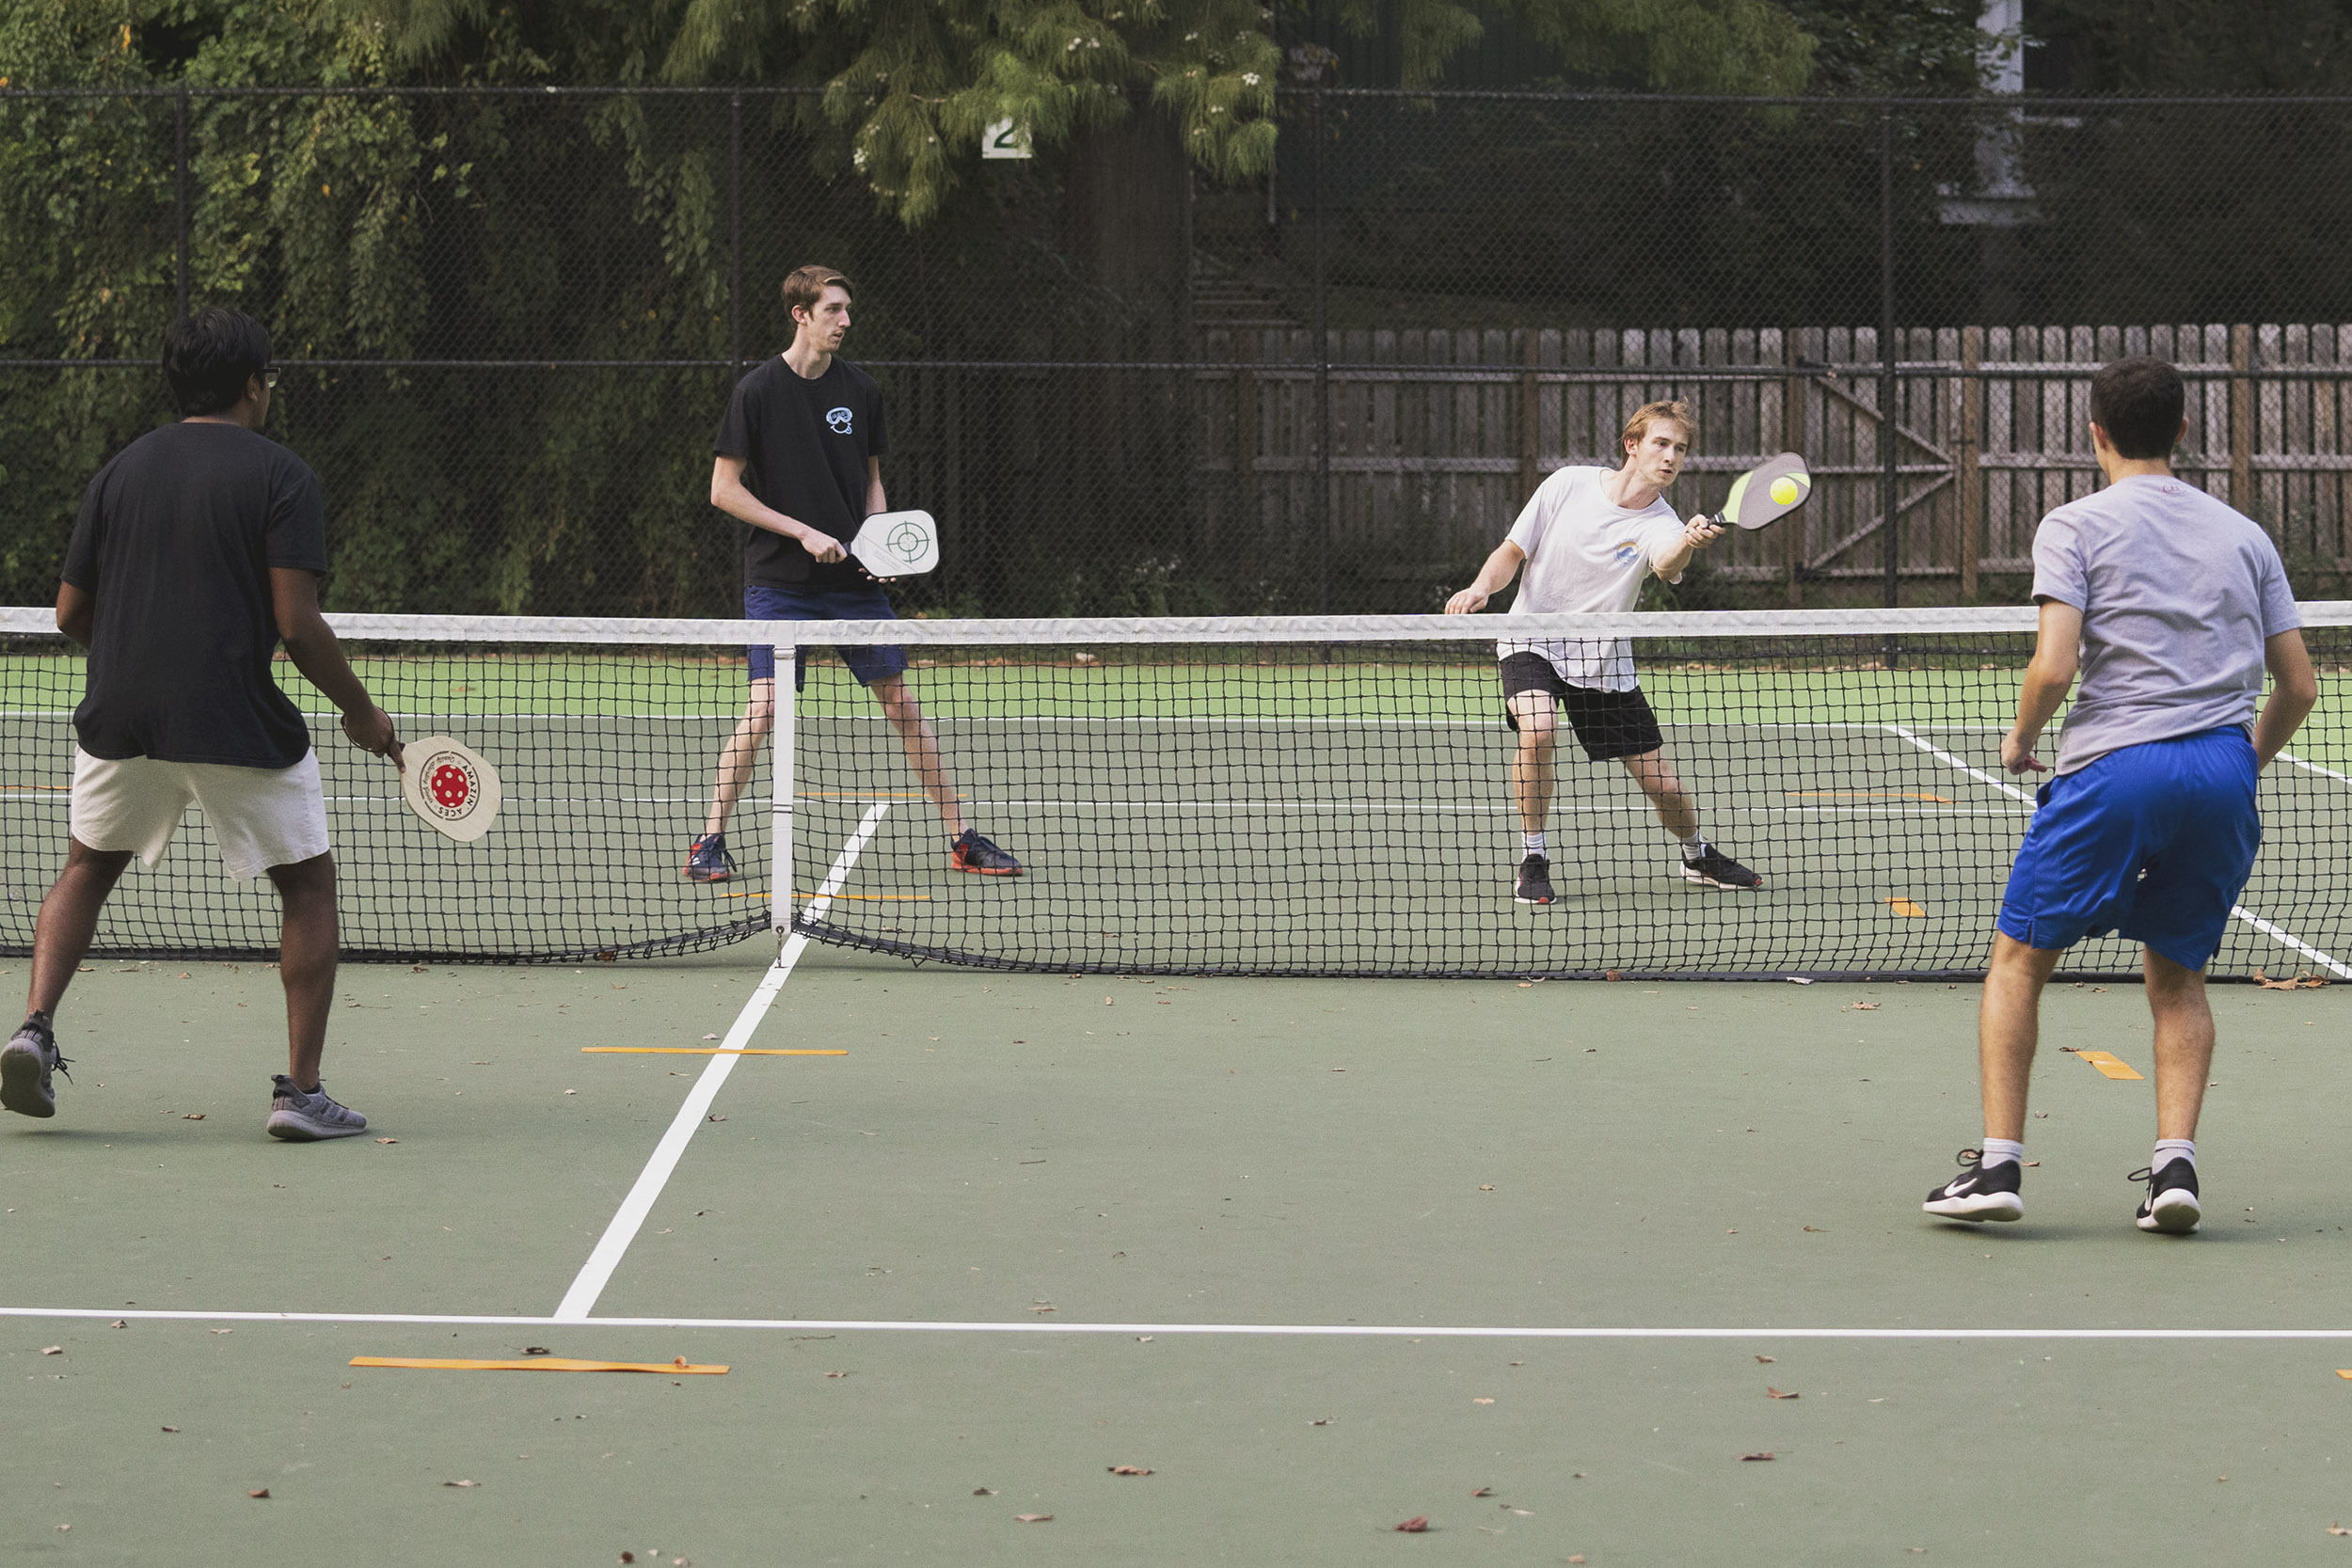 Four students playing Pickleball